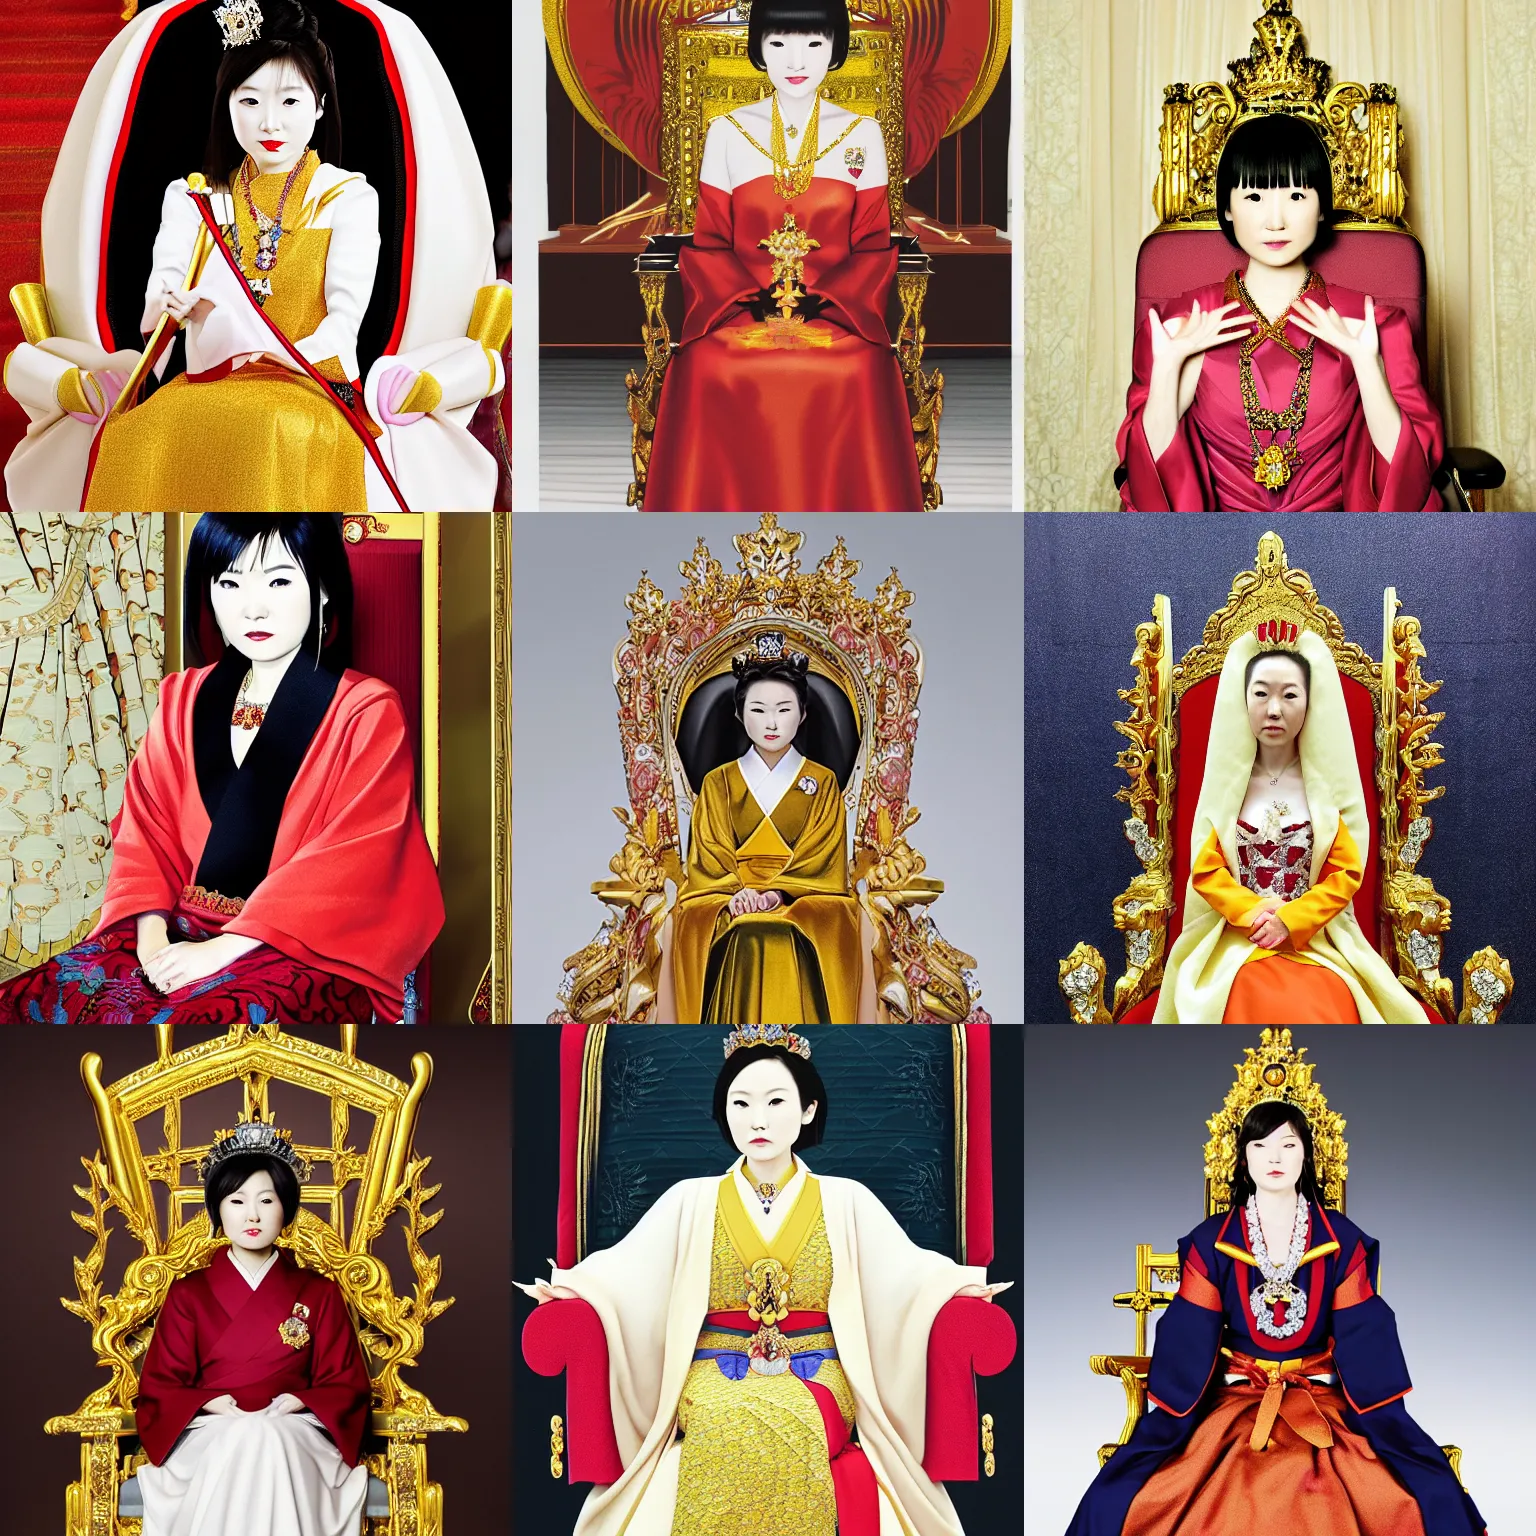 Prompt: regal yui hiwasawa from sitting on queens throne royalty wearing royal mantle gold jewelry by alex ross